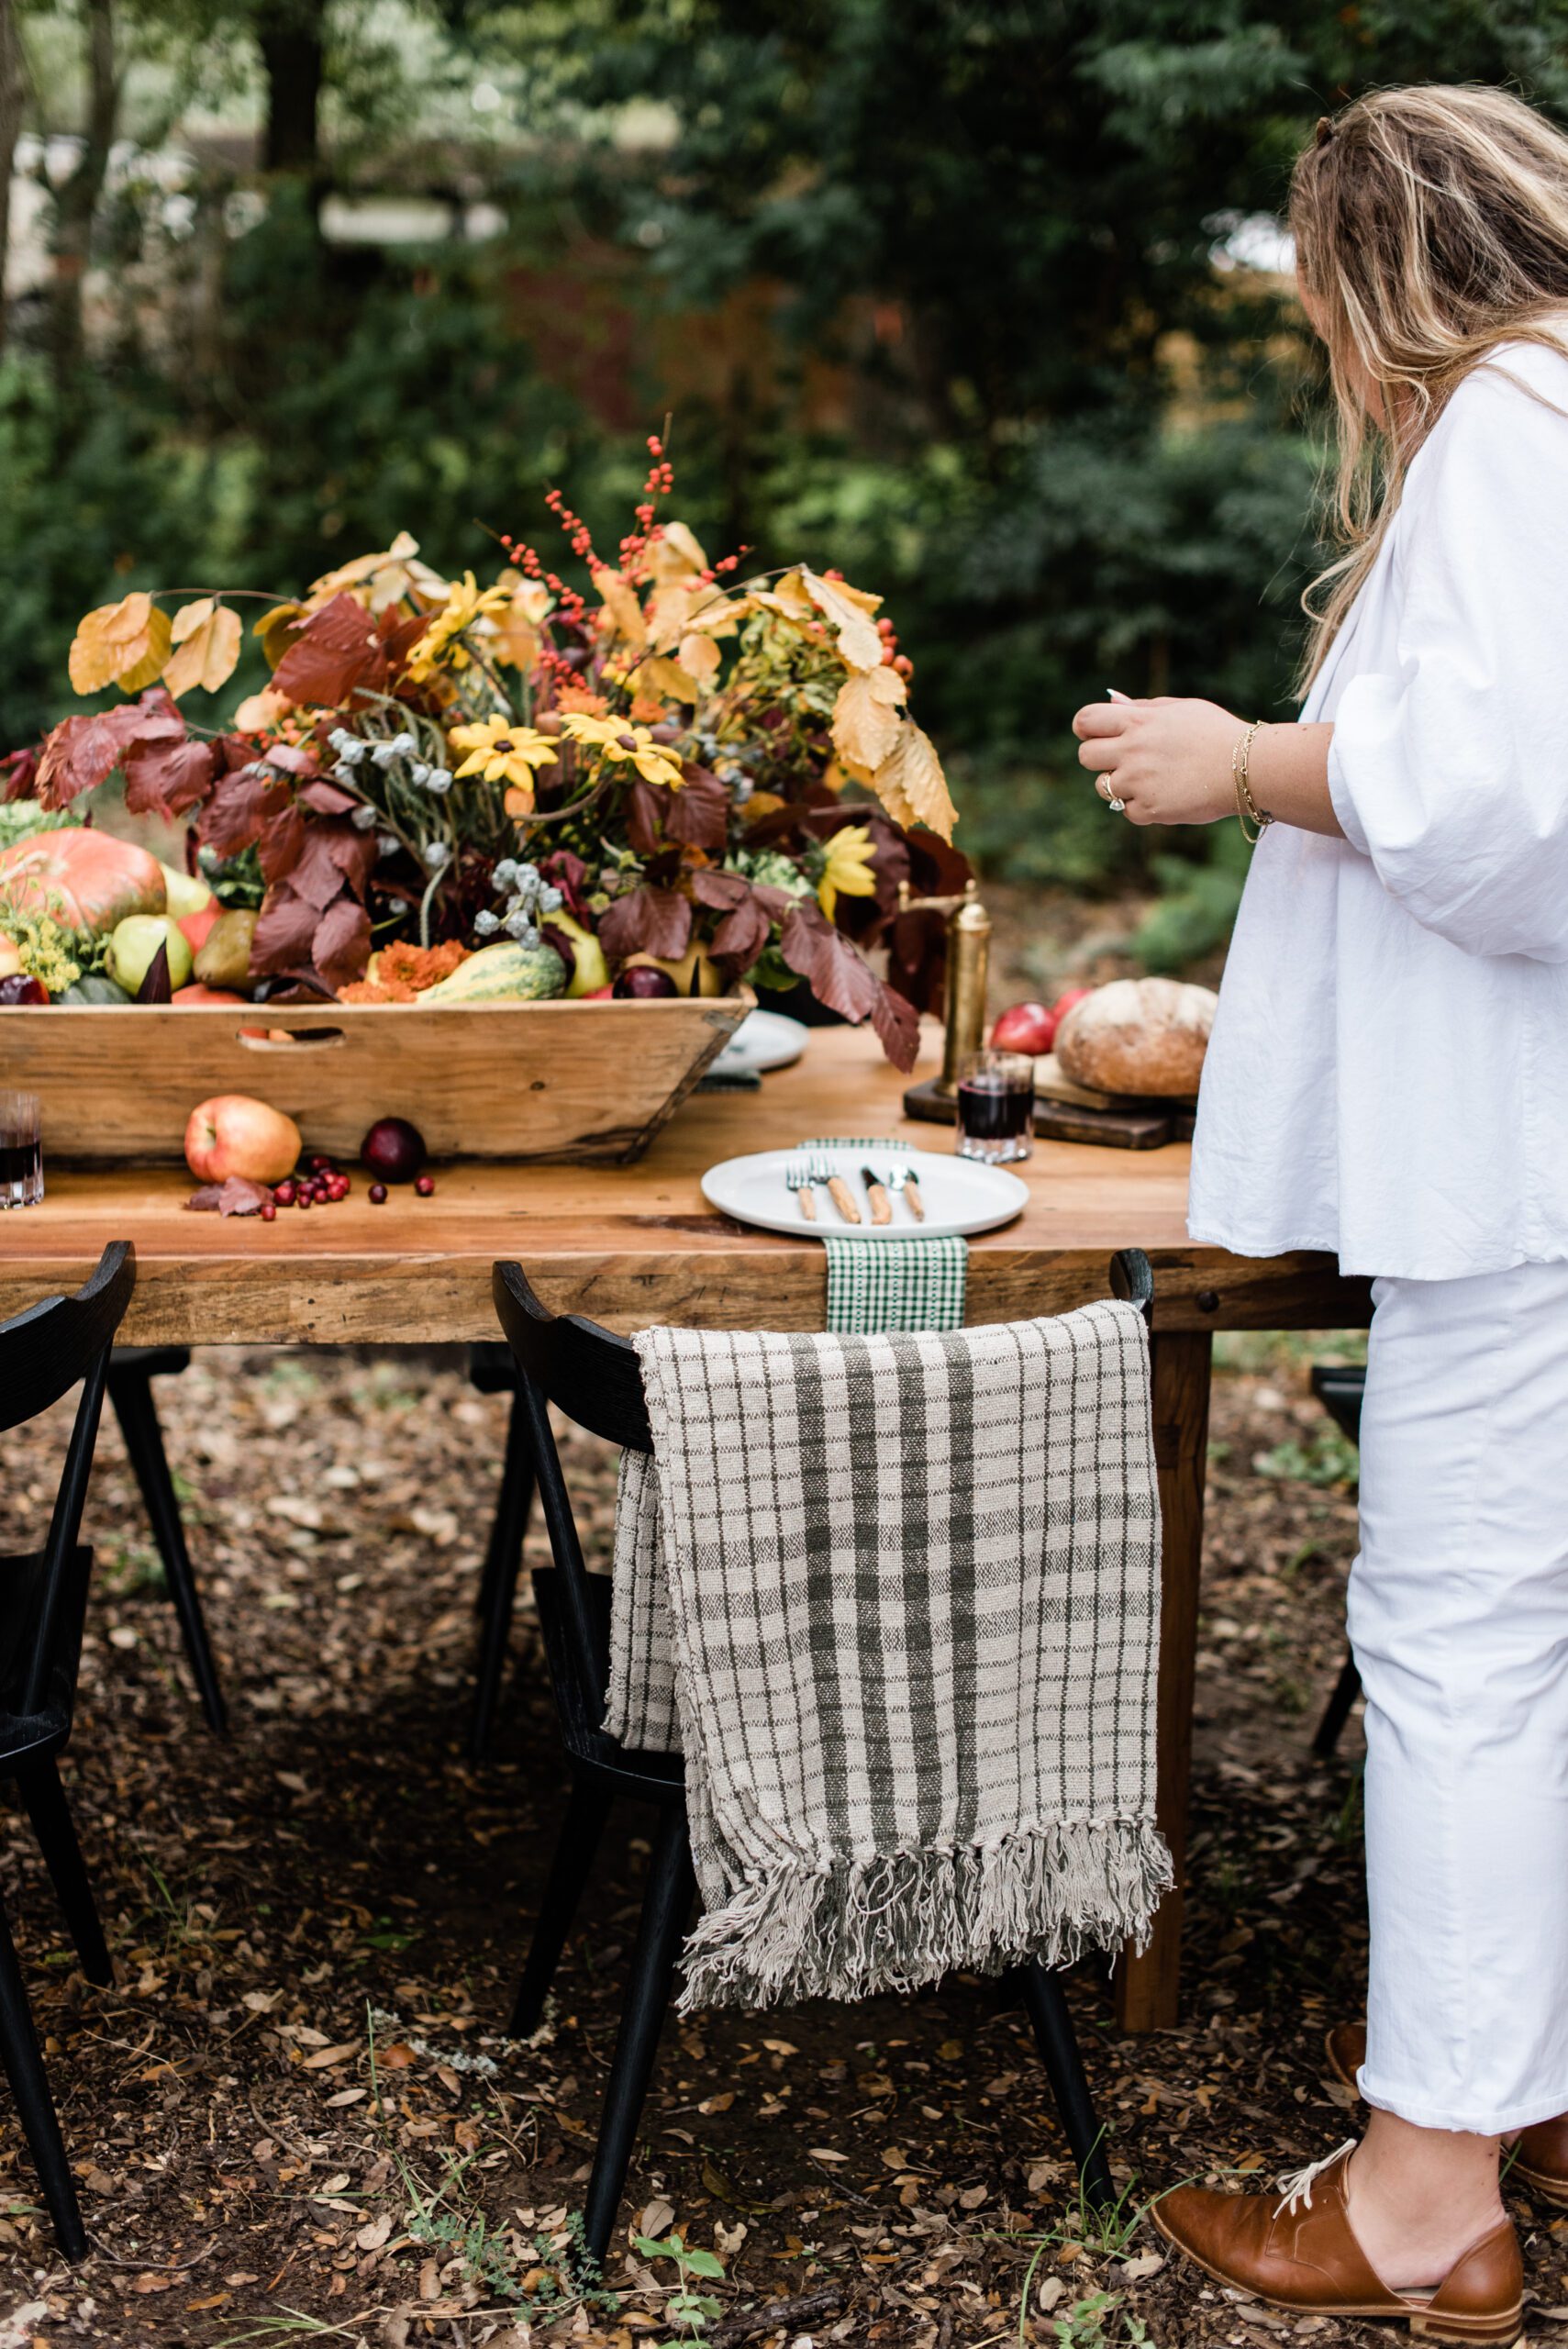 a cozy outdoor table designed with fall foliage, fruits, and vegatables and cozy linens